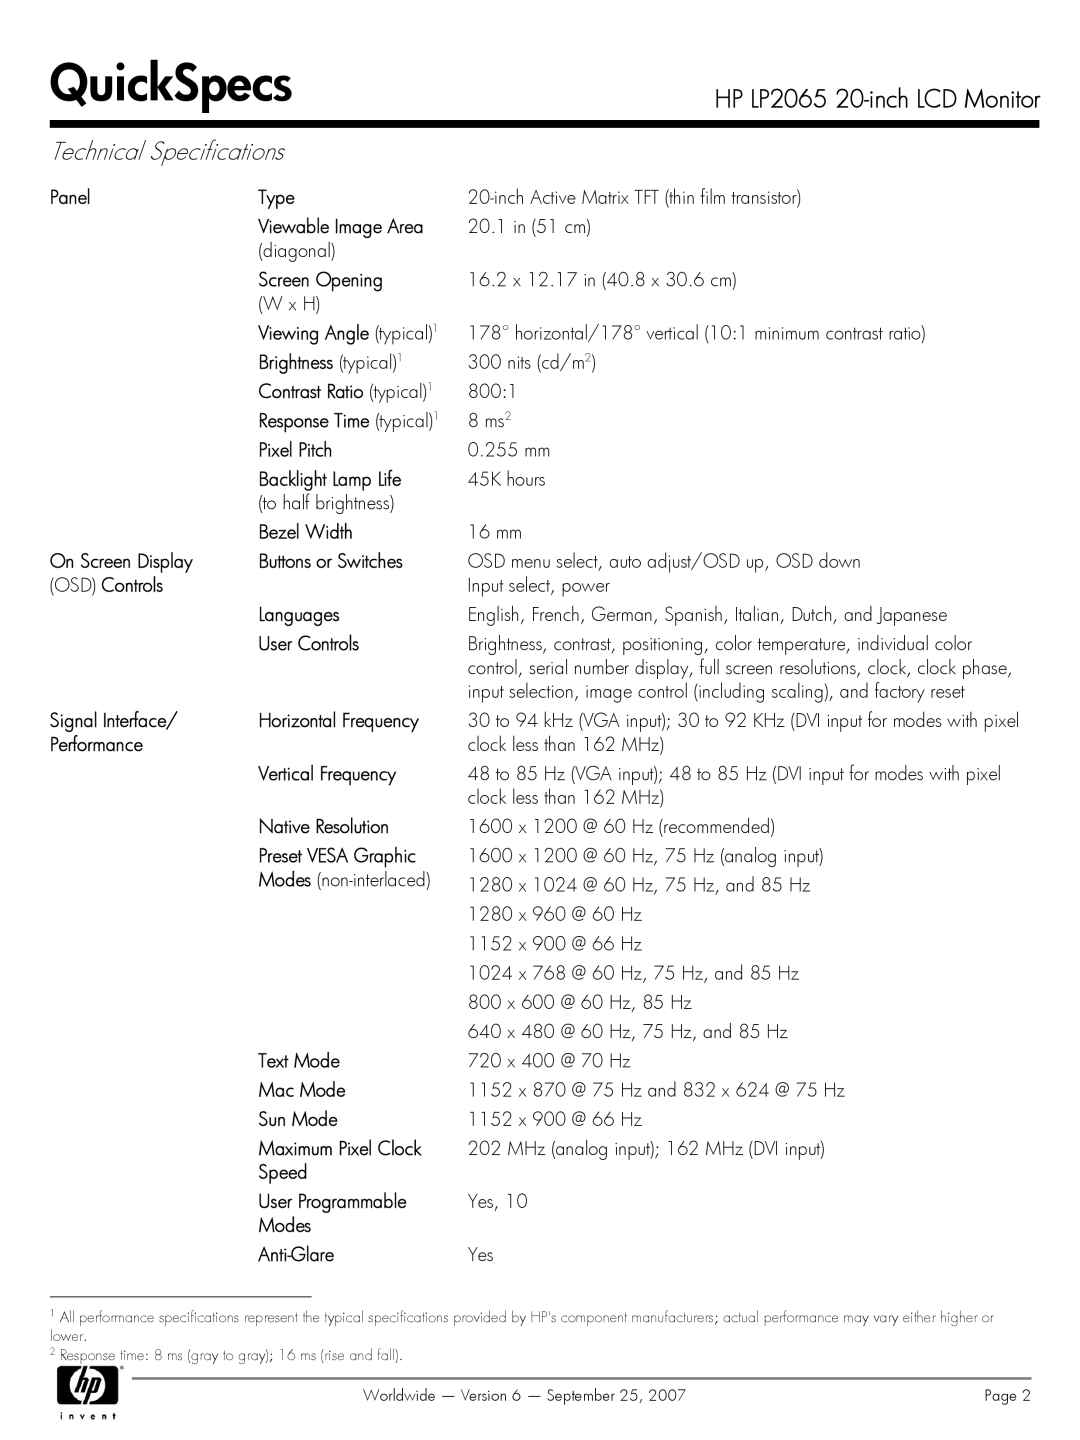 HP manual Technical Specifications, QuickSpecs, HP LP2065 20-inch LCD Monitor 